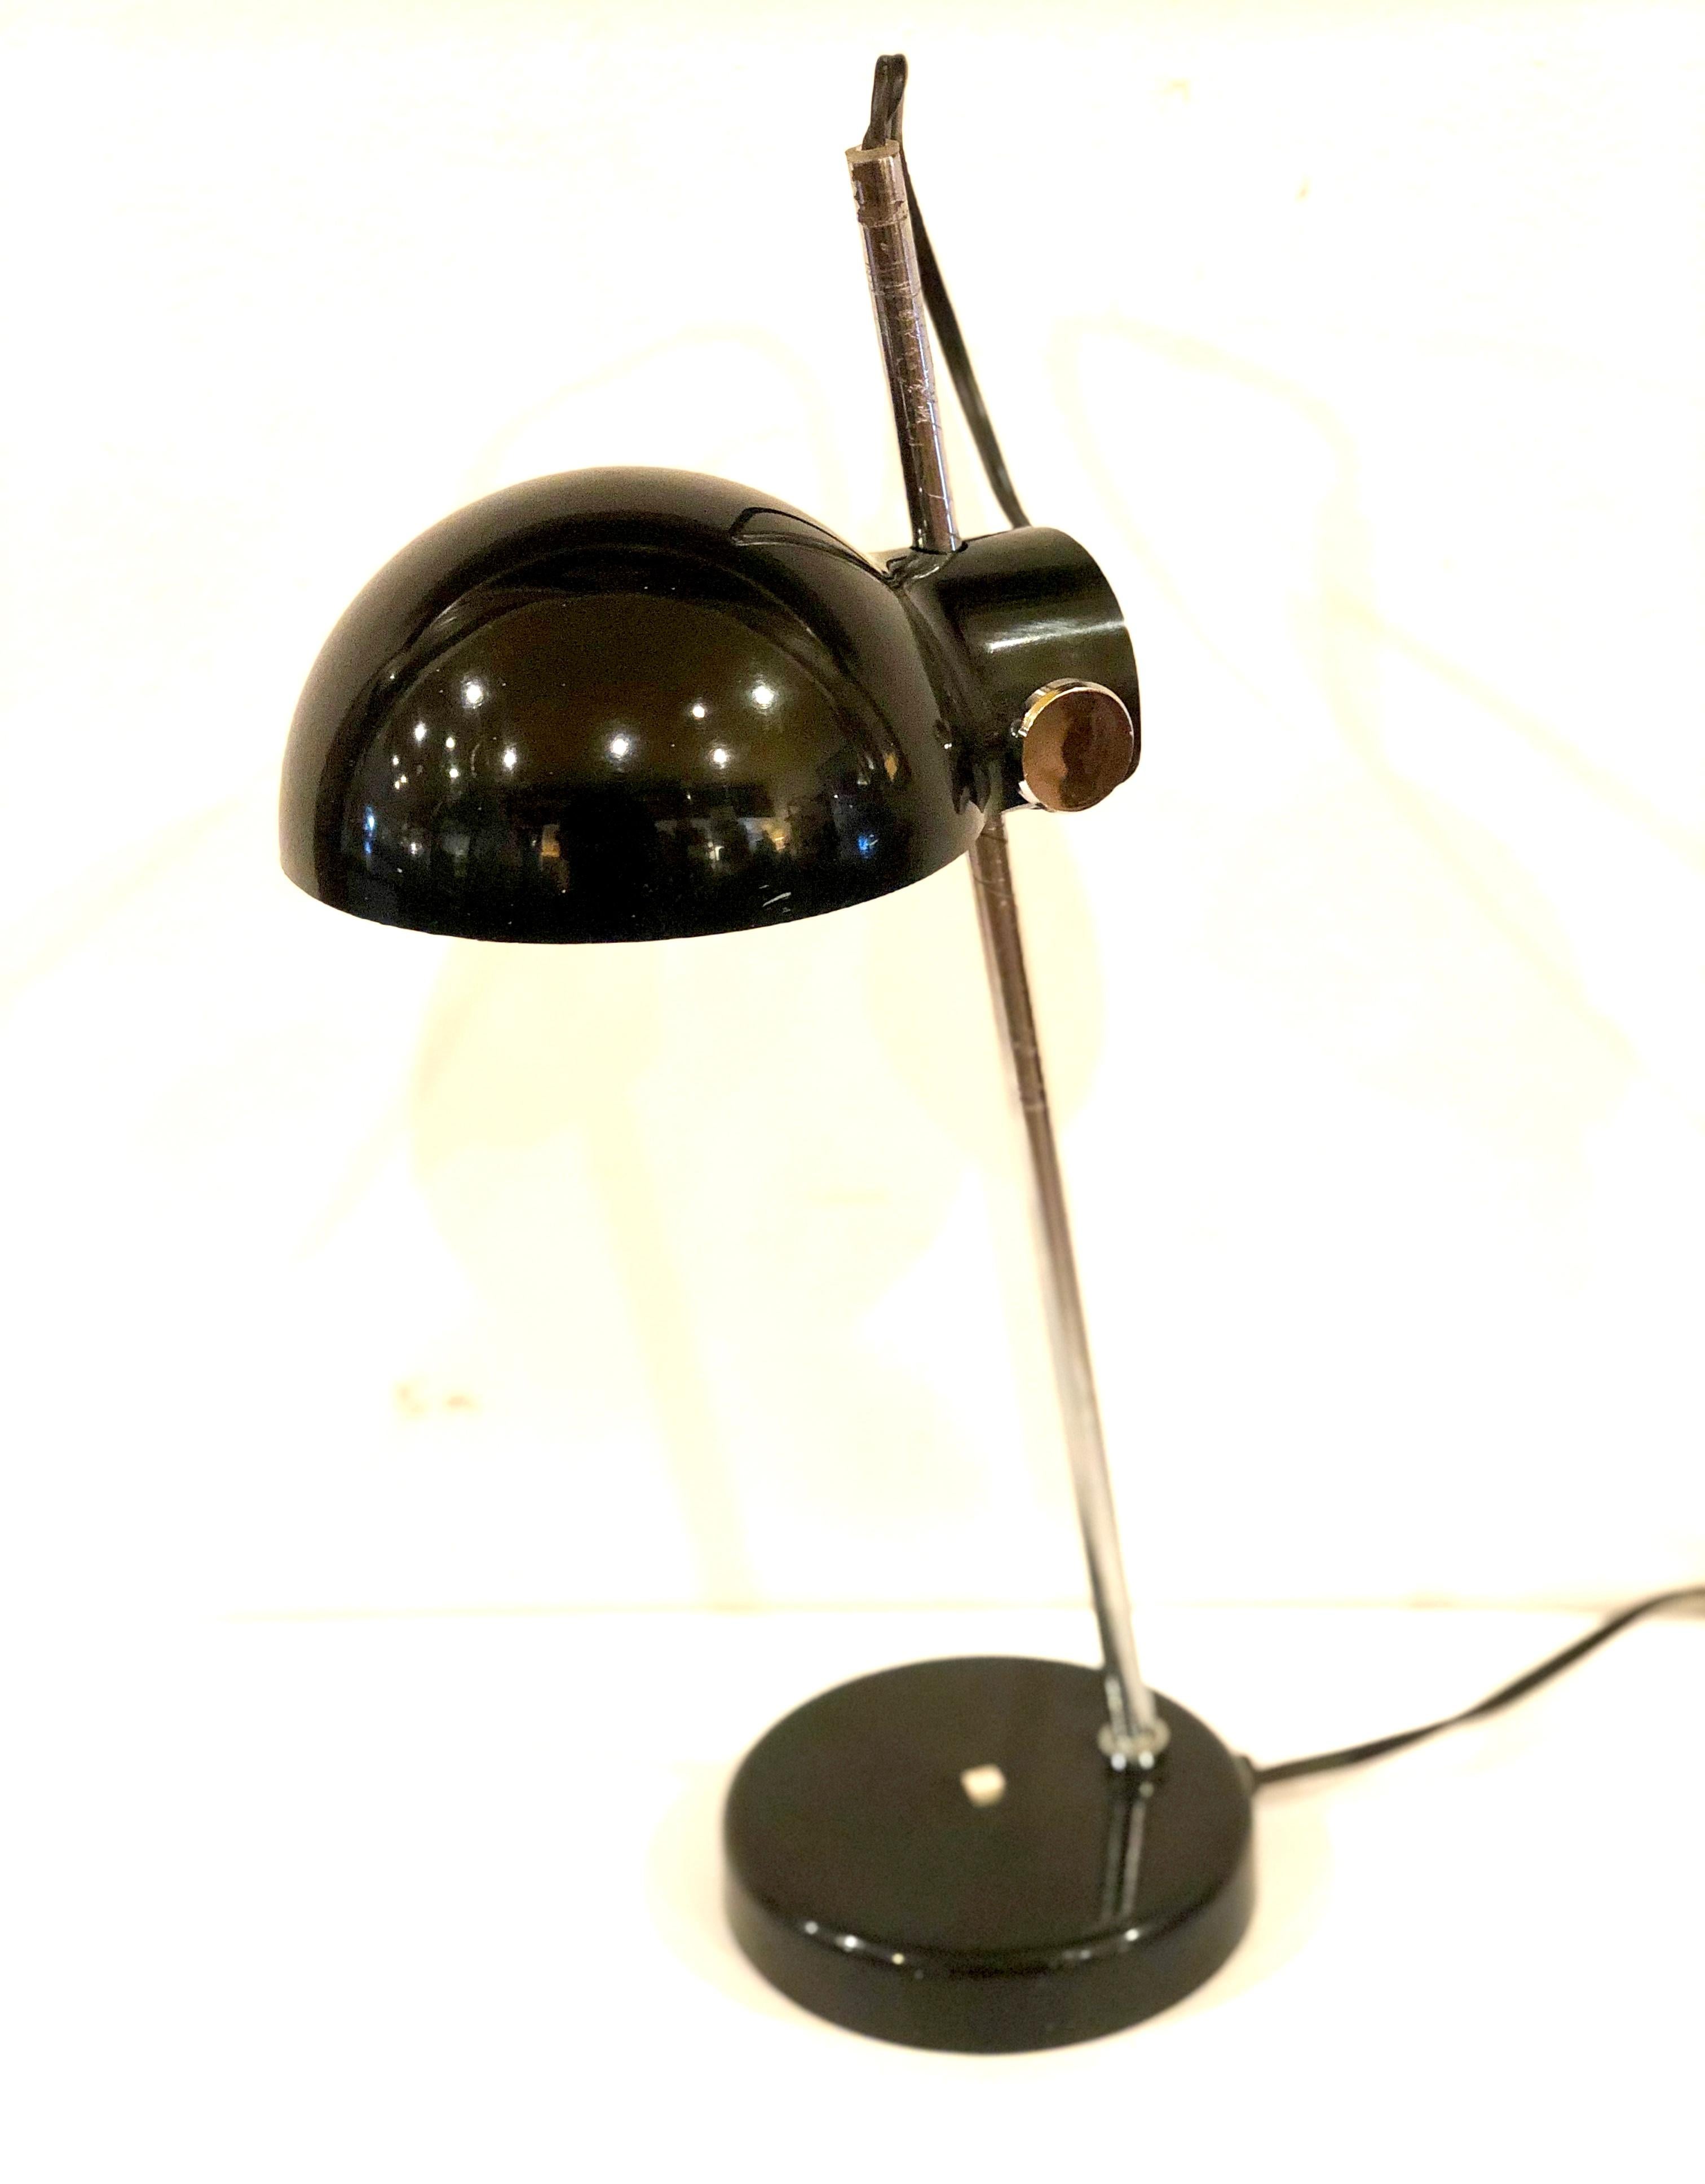 Adjustable desk table desk lamp made in Japan with rotating shade and goes up and down, in perfect working condition. The plastic has been polished looks great the chrome pole shows some marks due to age and moving the shade up and down.